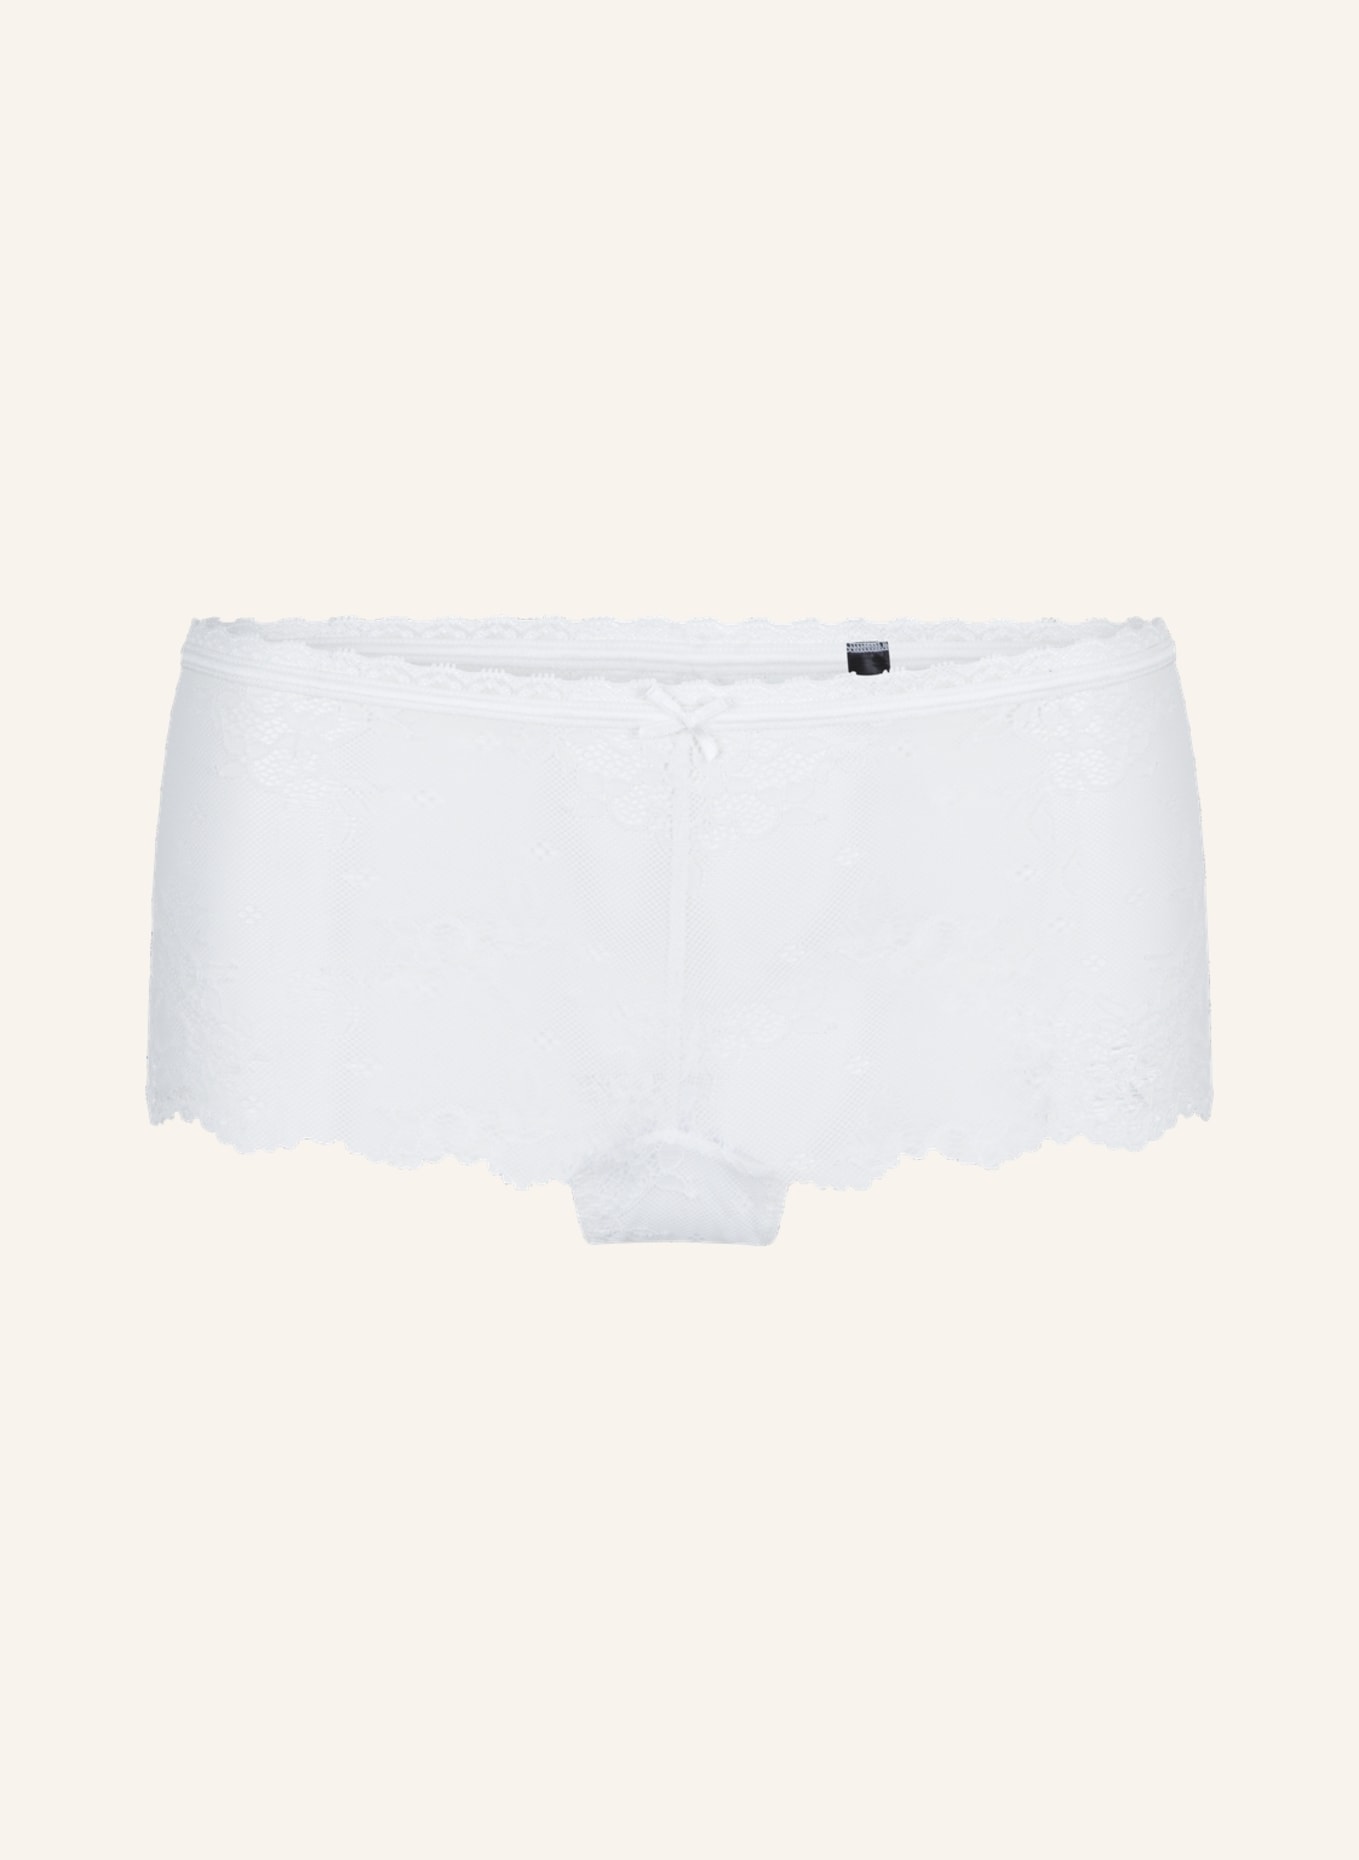 LINGADORE Panty DAILY, Farbe: WEISS (Bild 1)